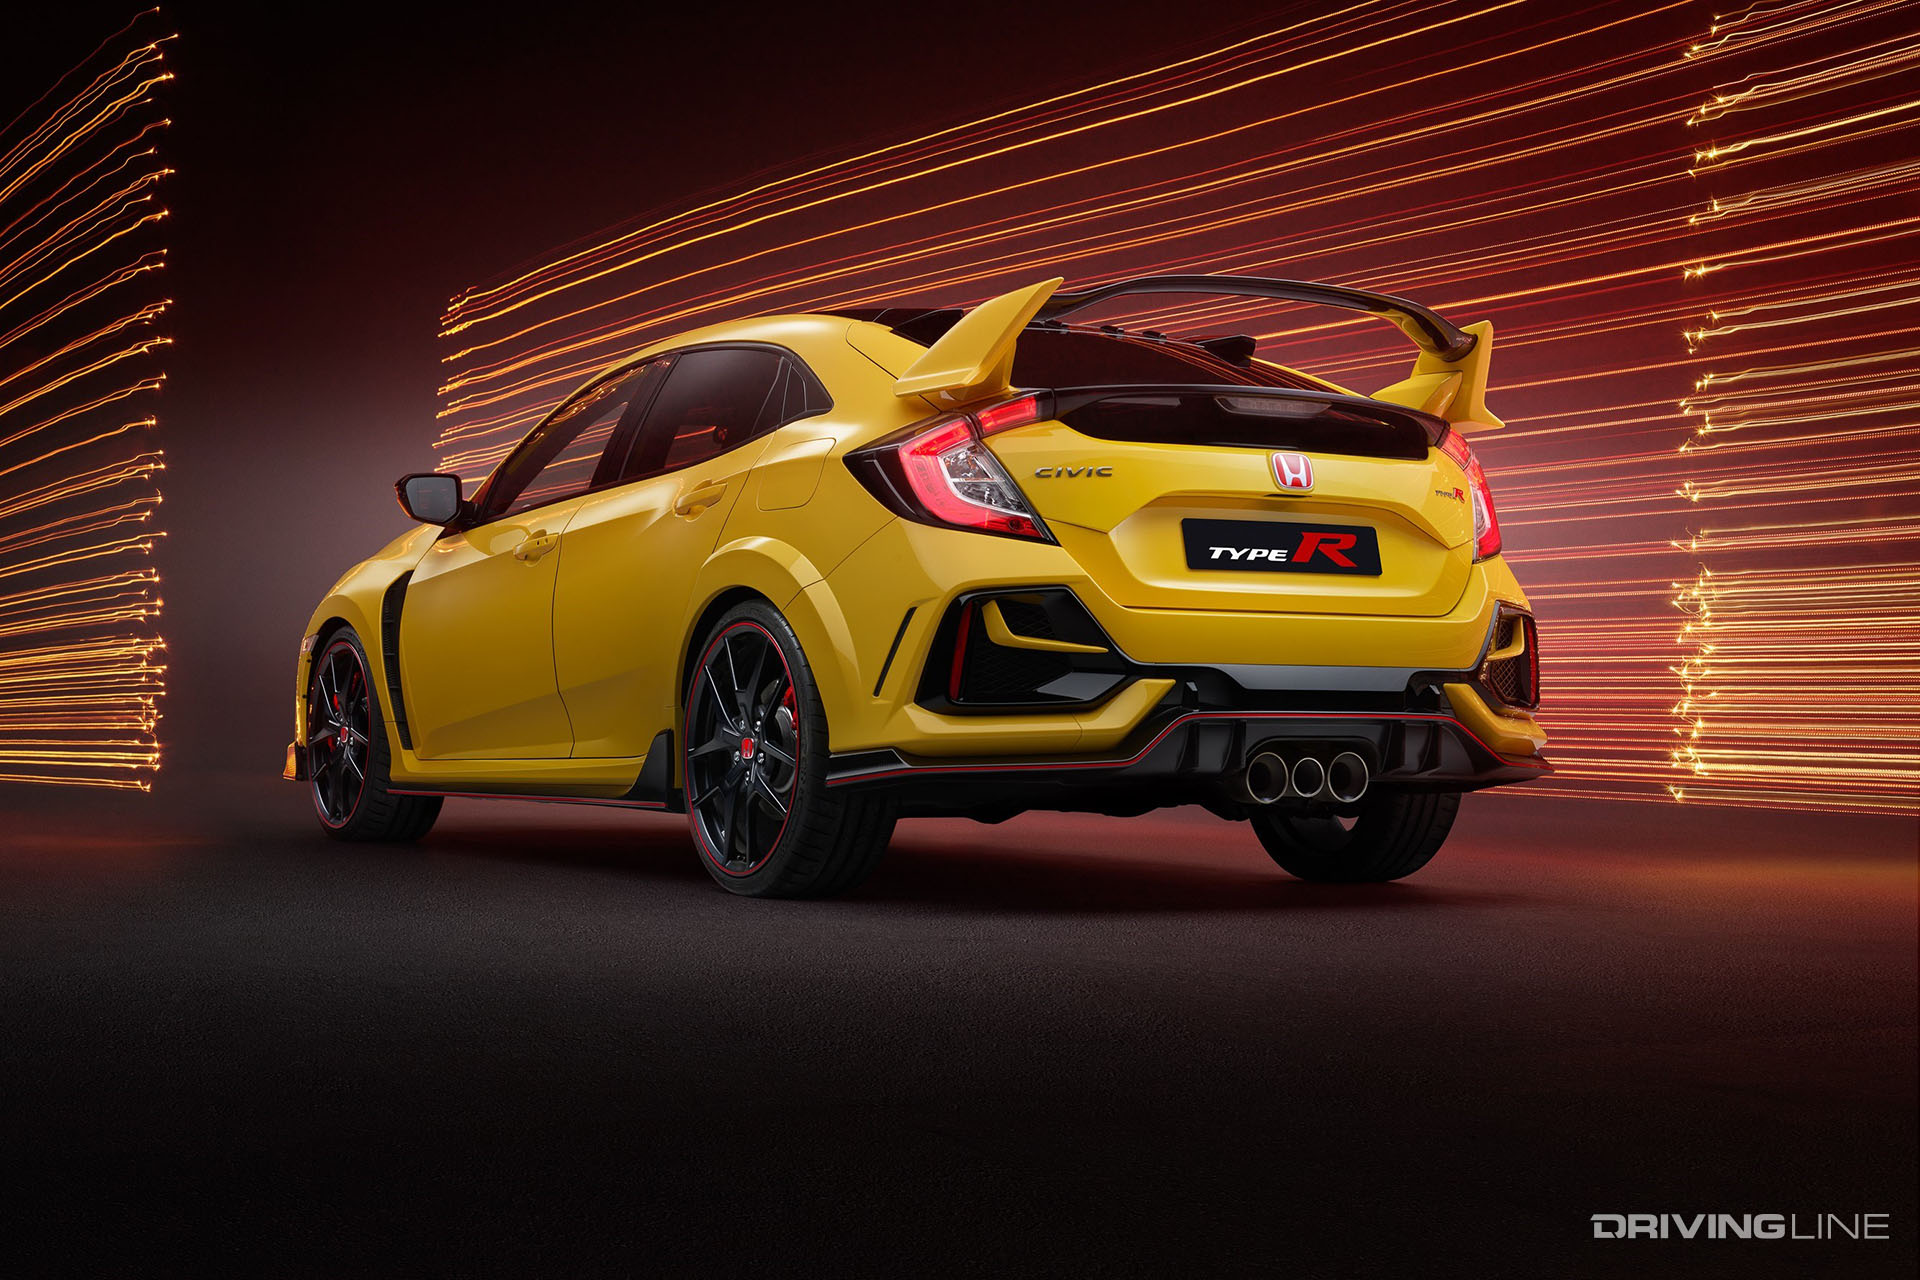 Lighter Faster Rarer The 2021 Honda Civic Type R Limited Edition Is Coming To America Drivingline